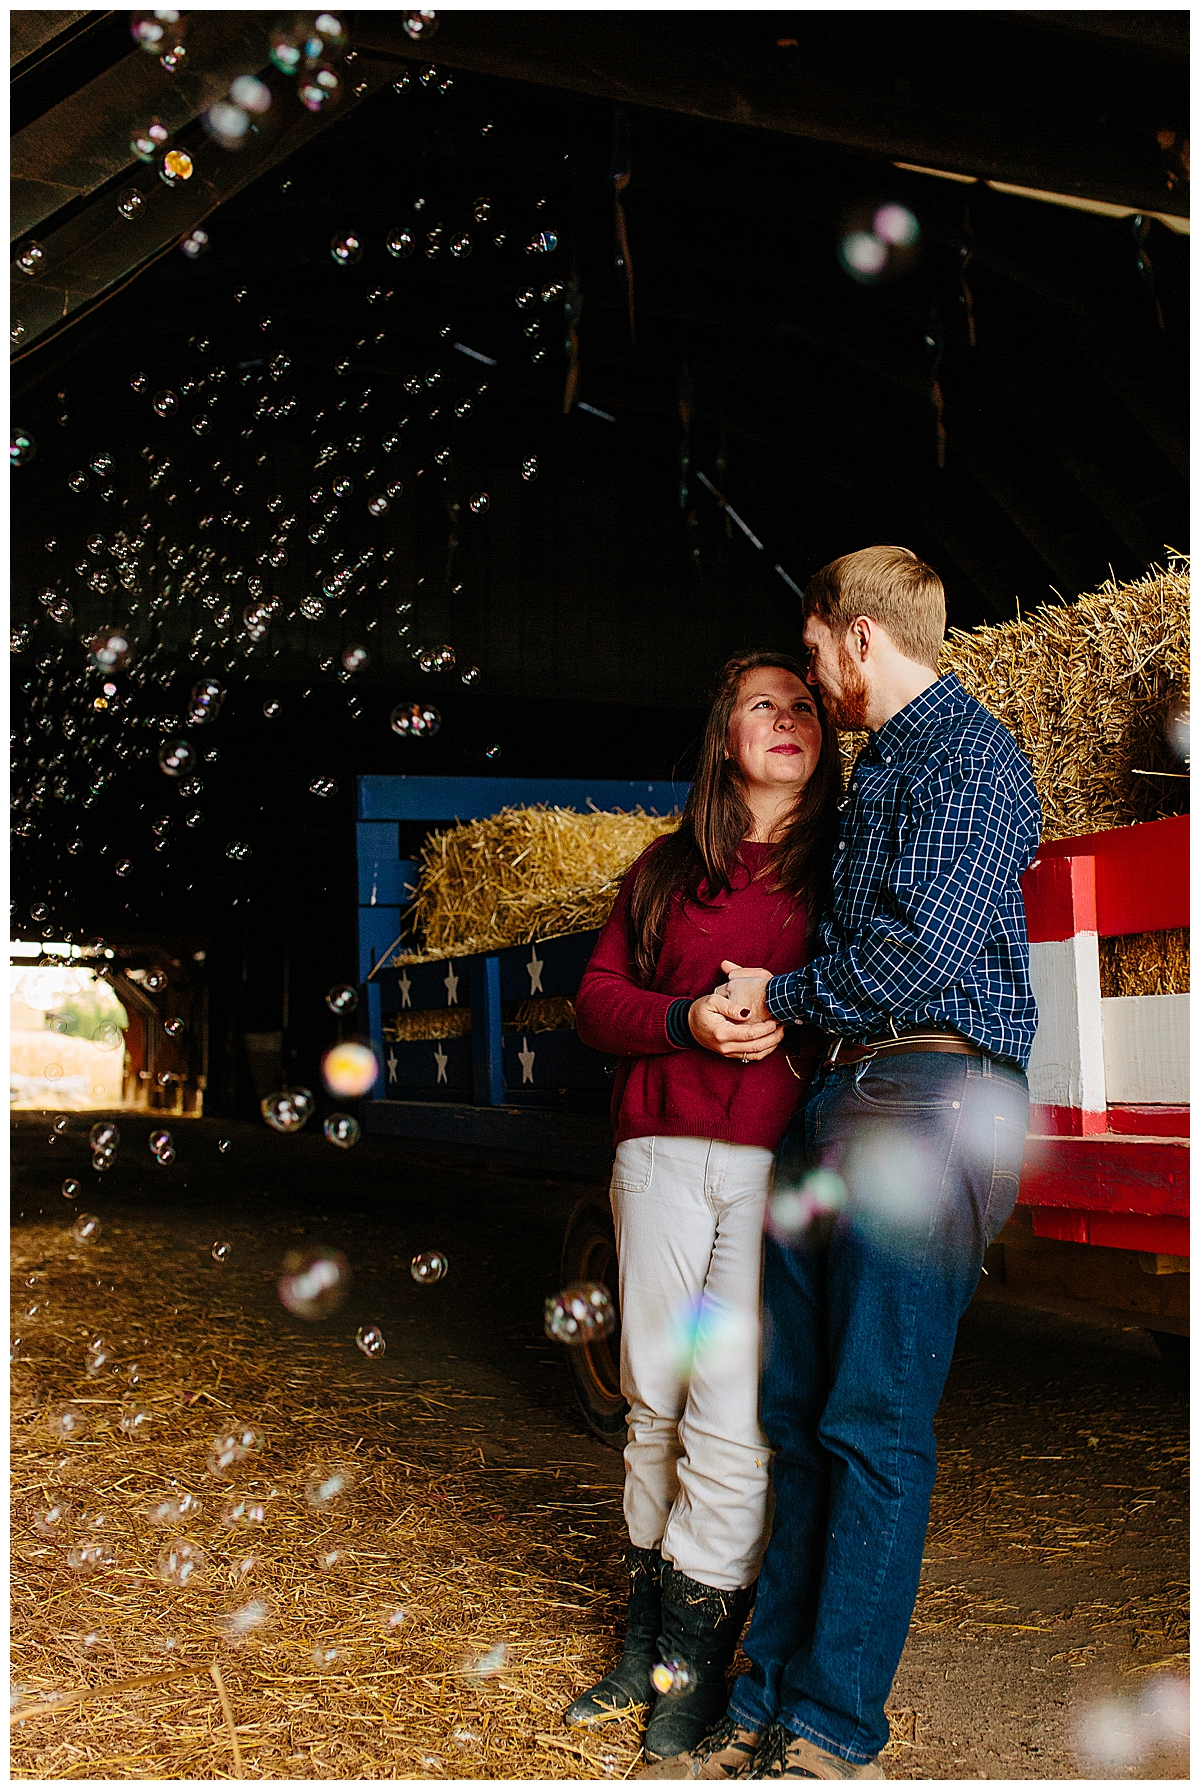 Deanna & Clifford's Cox Farms Centreville fall engagement session with Seana Shuchart Photography